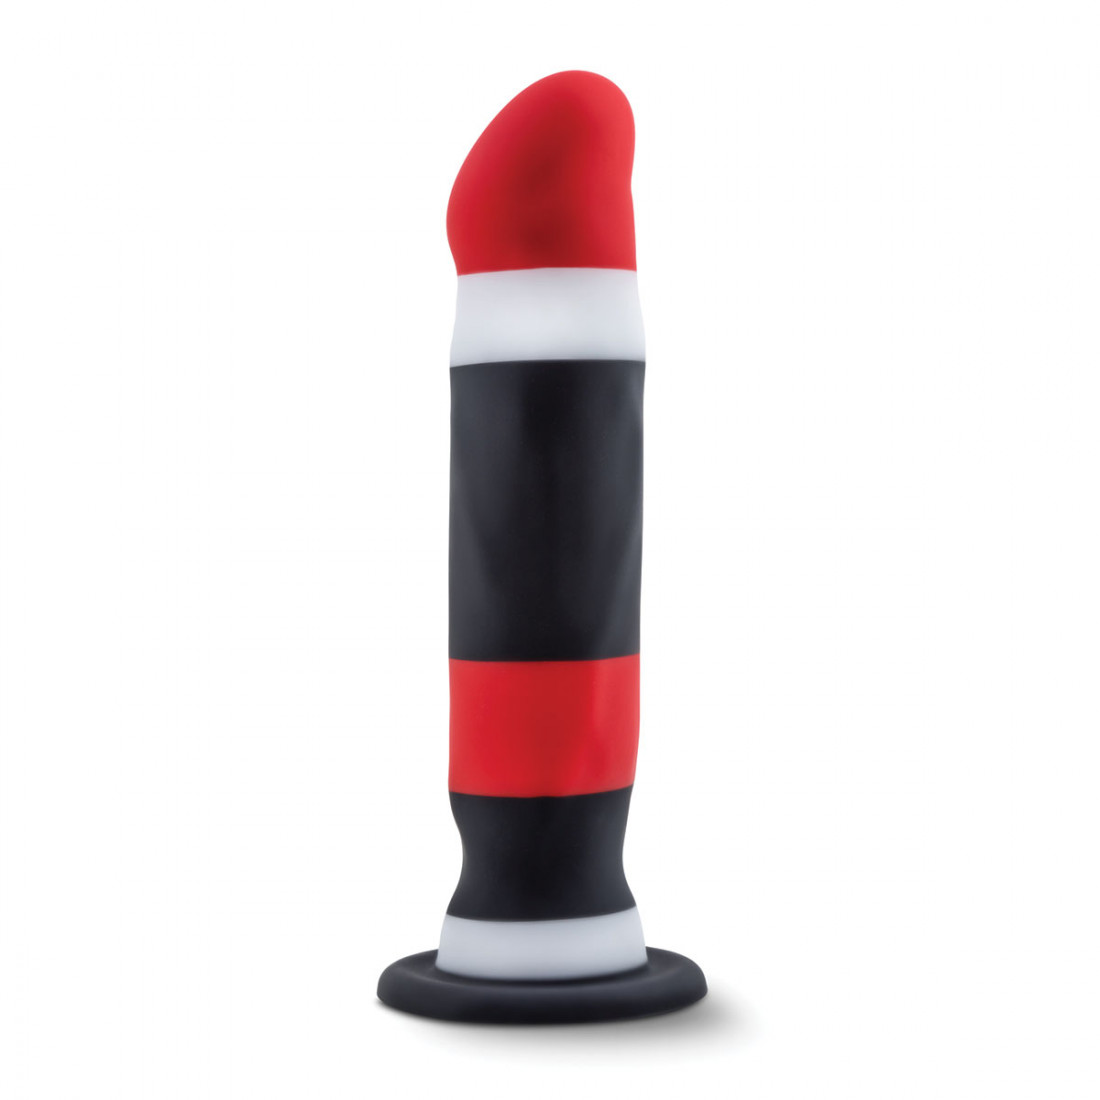 Avant D5 Sin City platinum silicone body safe dildo with large straight shaft